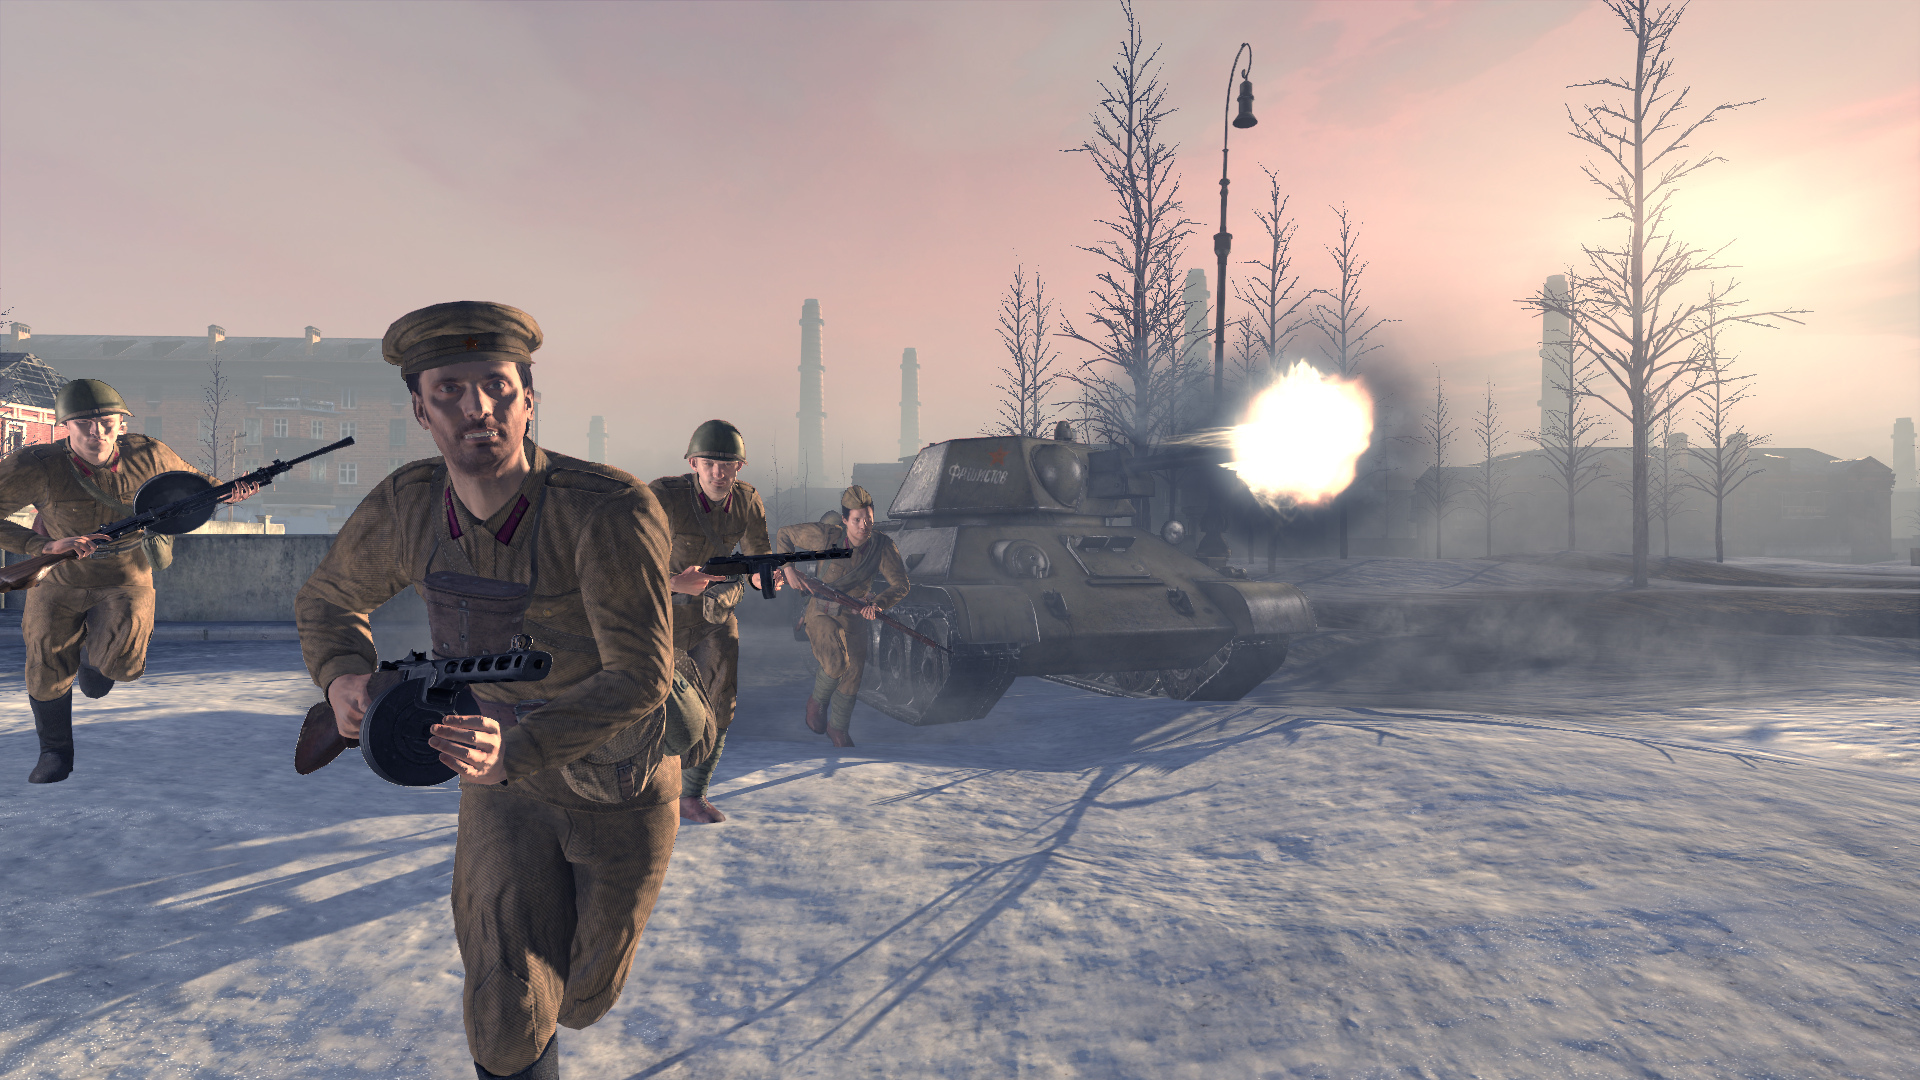 Red Orchestra 2: Heroes Of Stalingrad HD wallpapers, Desktop wallpaper - most viewed